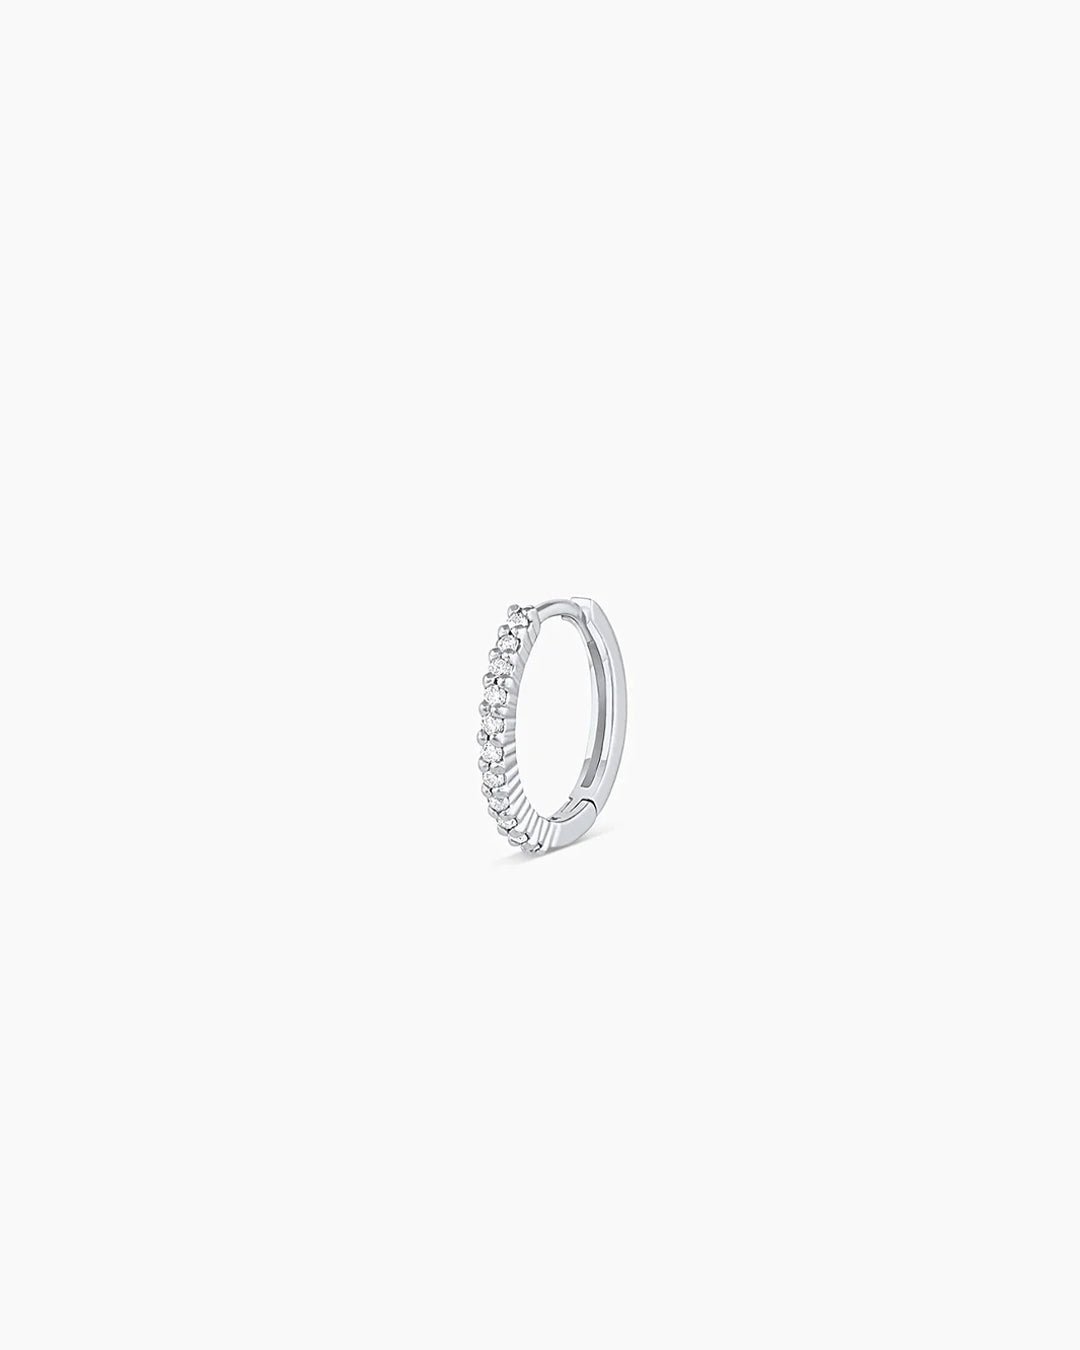 Woman wearing Classic Gold Huggie || option::14k Solid White Gold, 11mm, Single